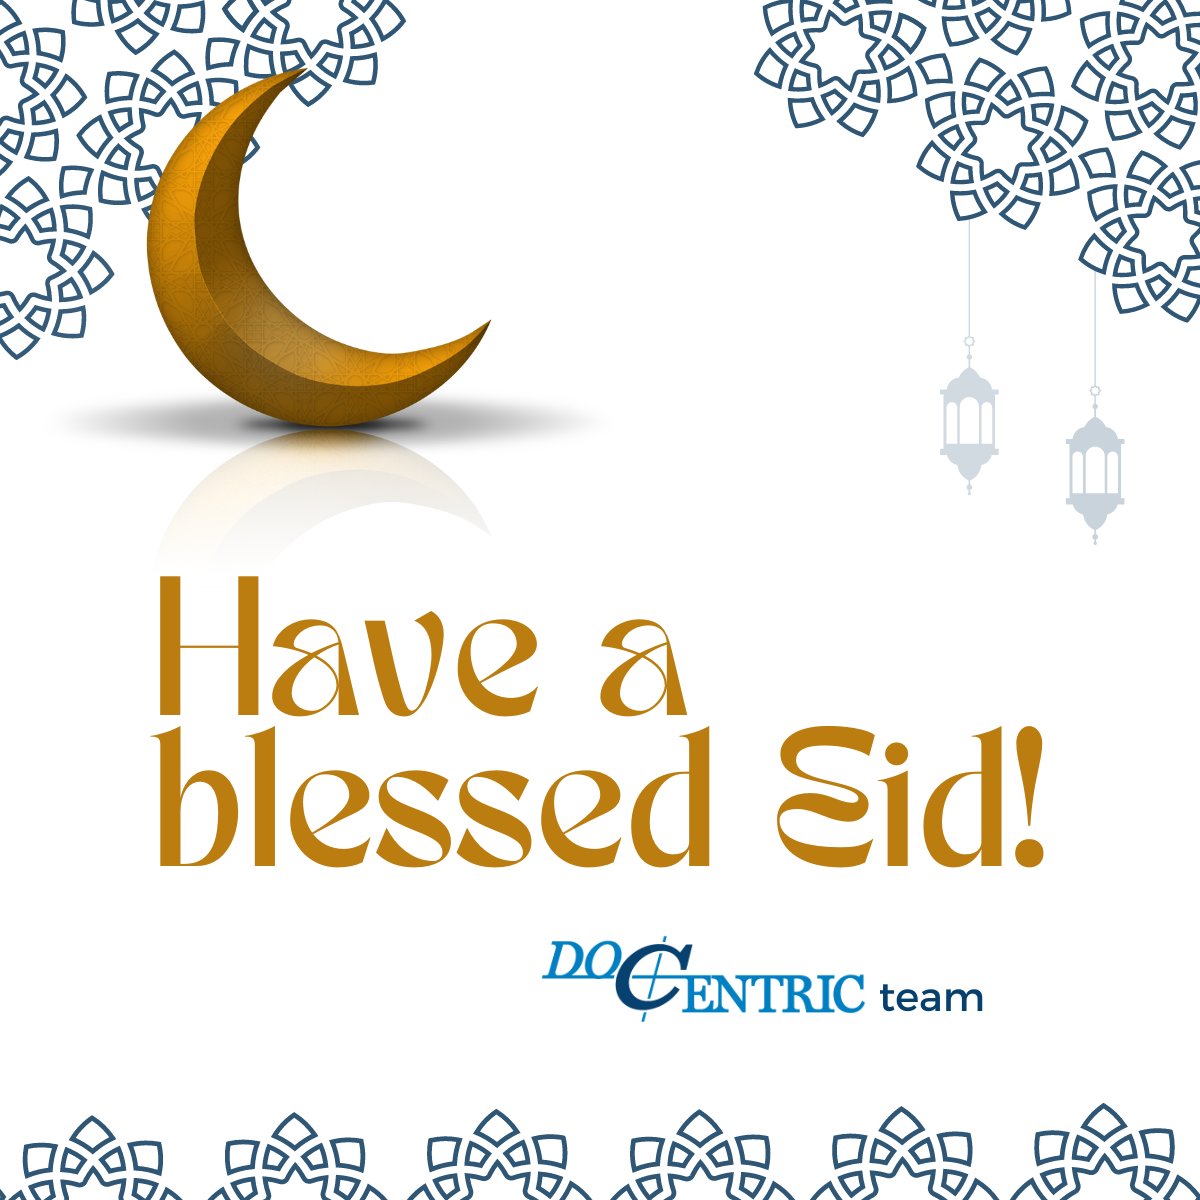 Sending warm wishes to our colleagues, partners, and everyone else that celebrates - May your Eid be filled with happiness and prosperity! 
 
#dynamics365fo #d365fo #msdyn365fo #DocentricTeam